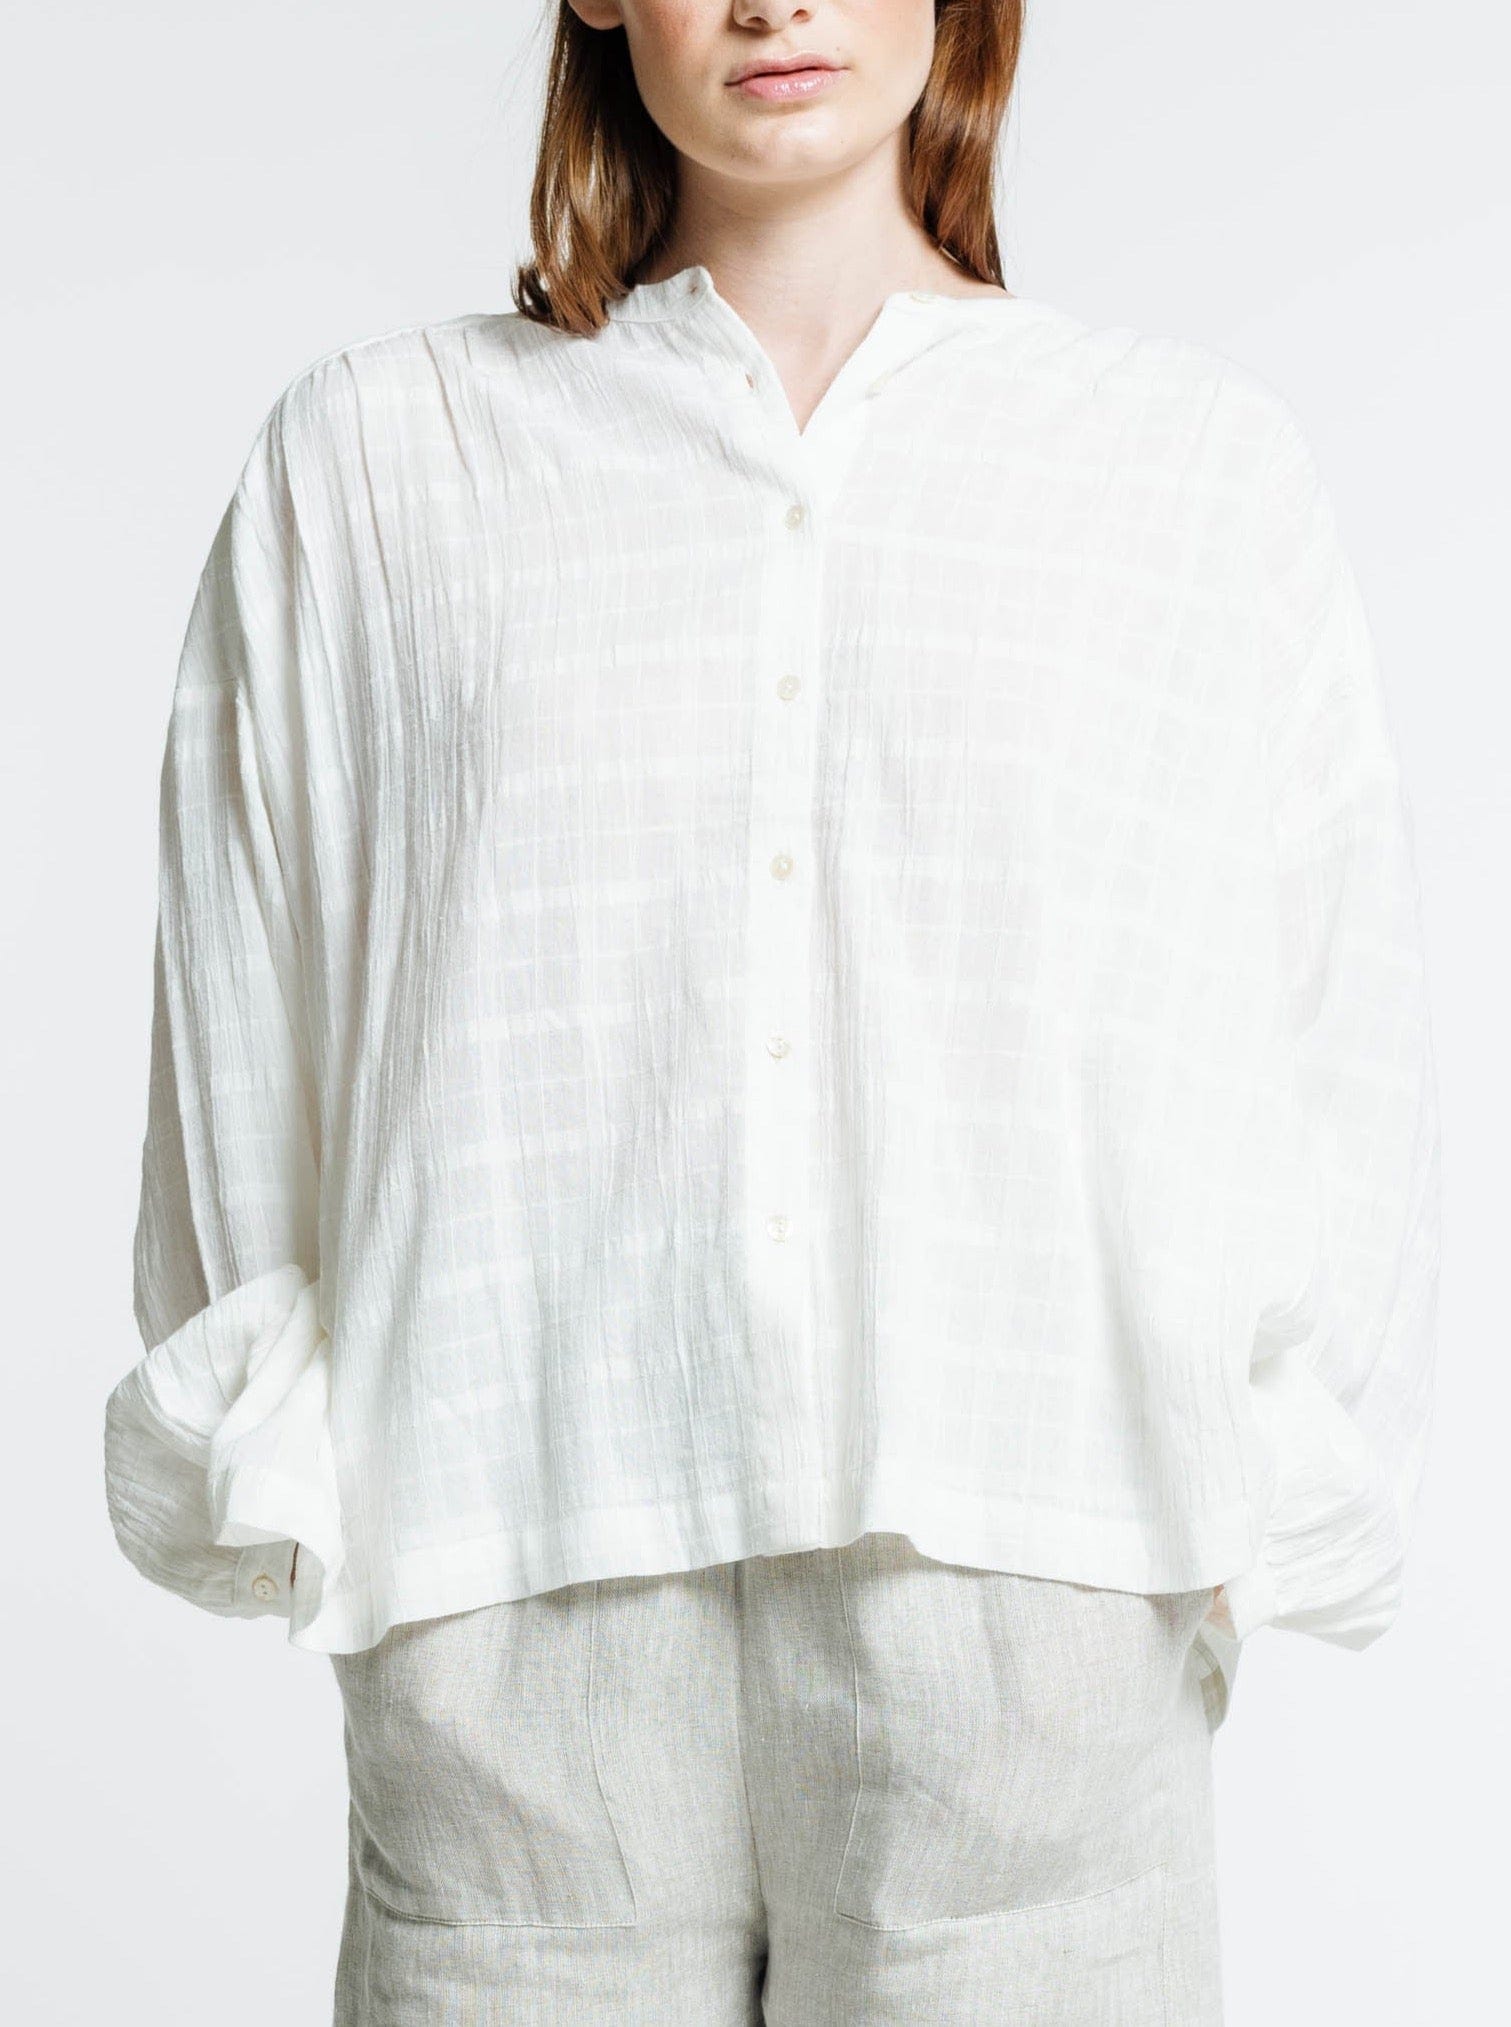 The model is wearing the Francoise Top - Alabaster Plaid and linen pants.